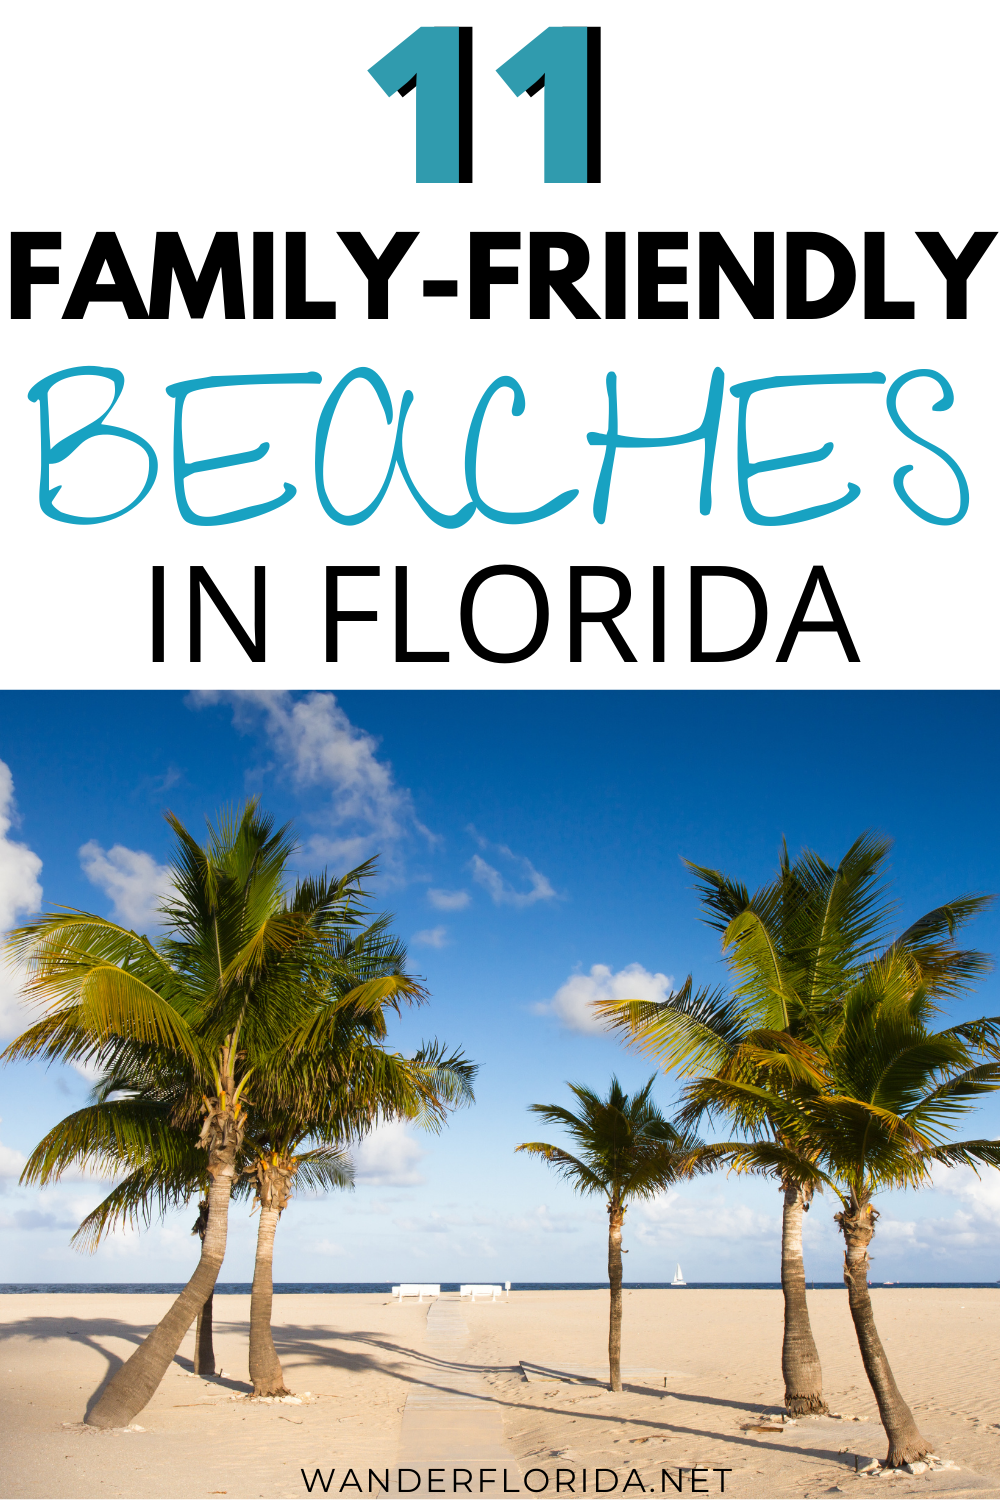 11 Stunning Florida Beaches that are Perfect for Families